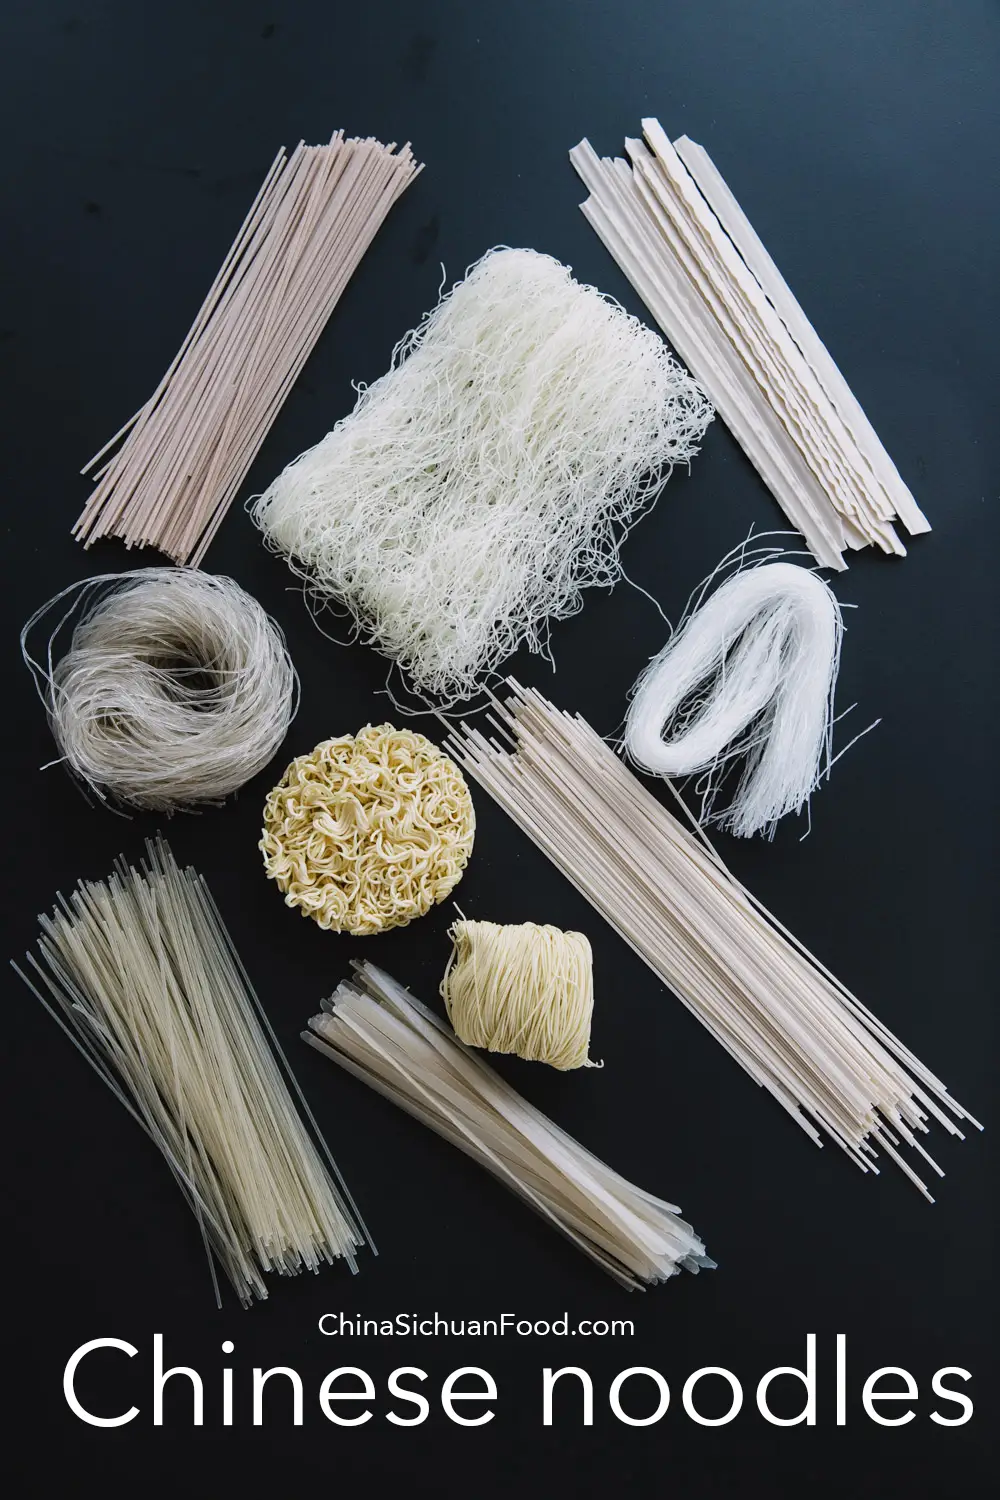 types of Chinese noodles|chinasichuanfood.com